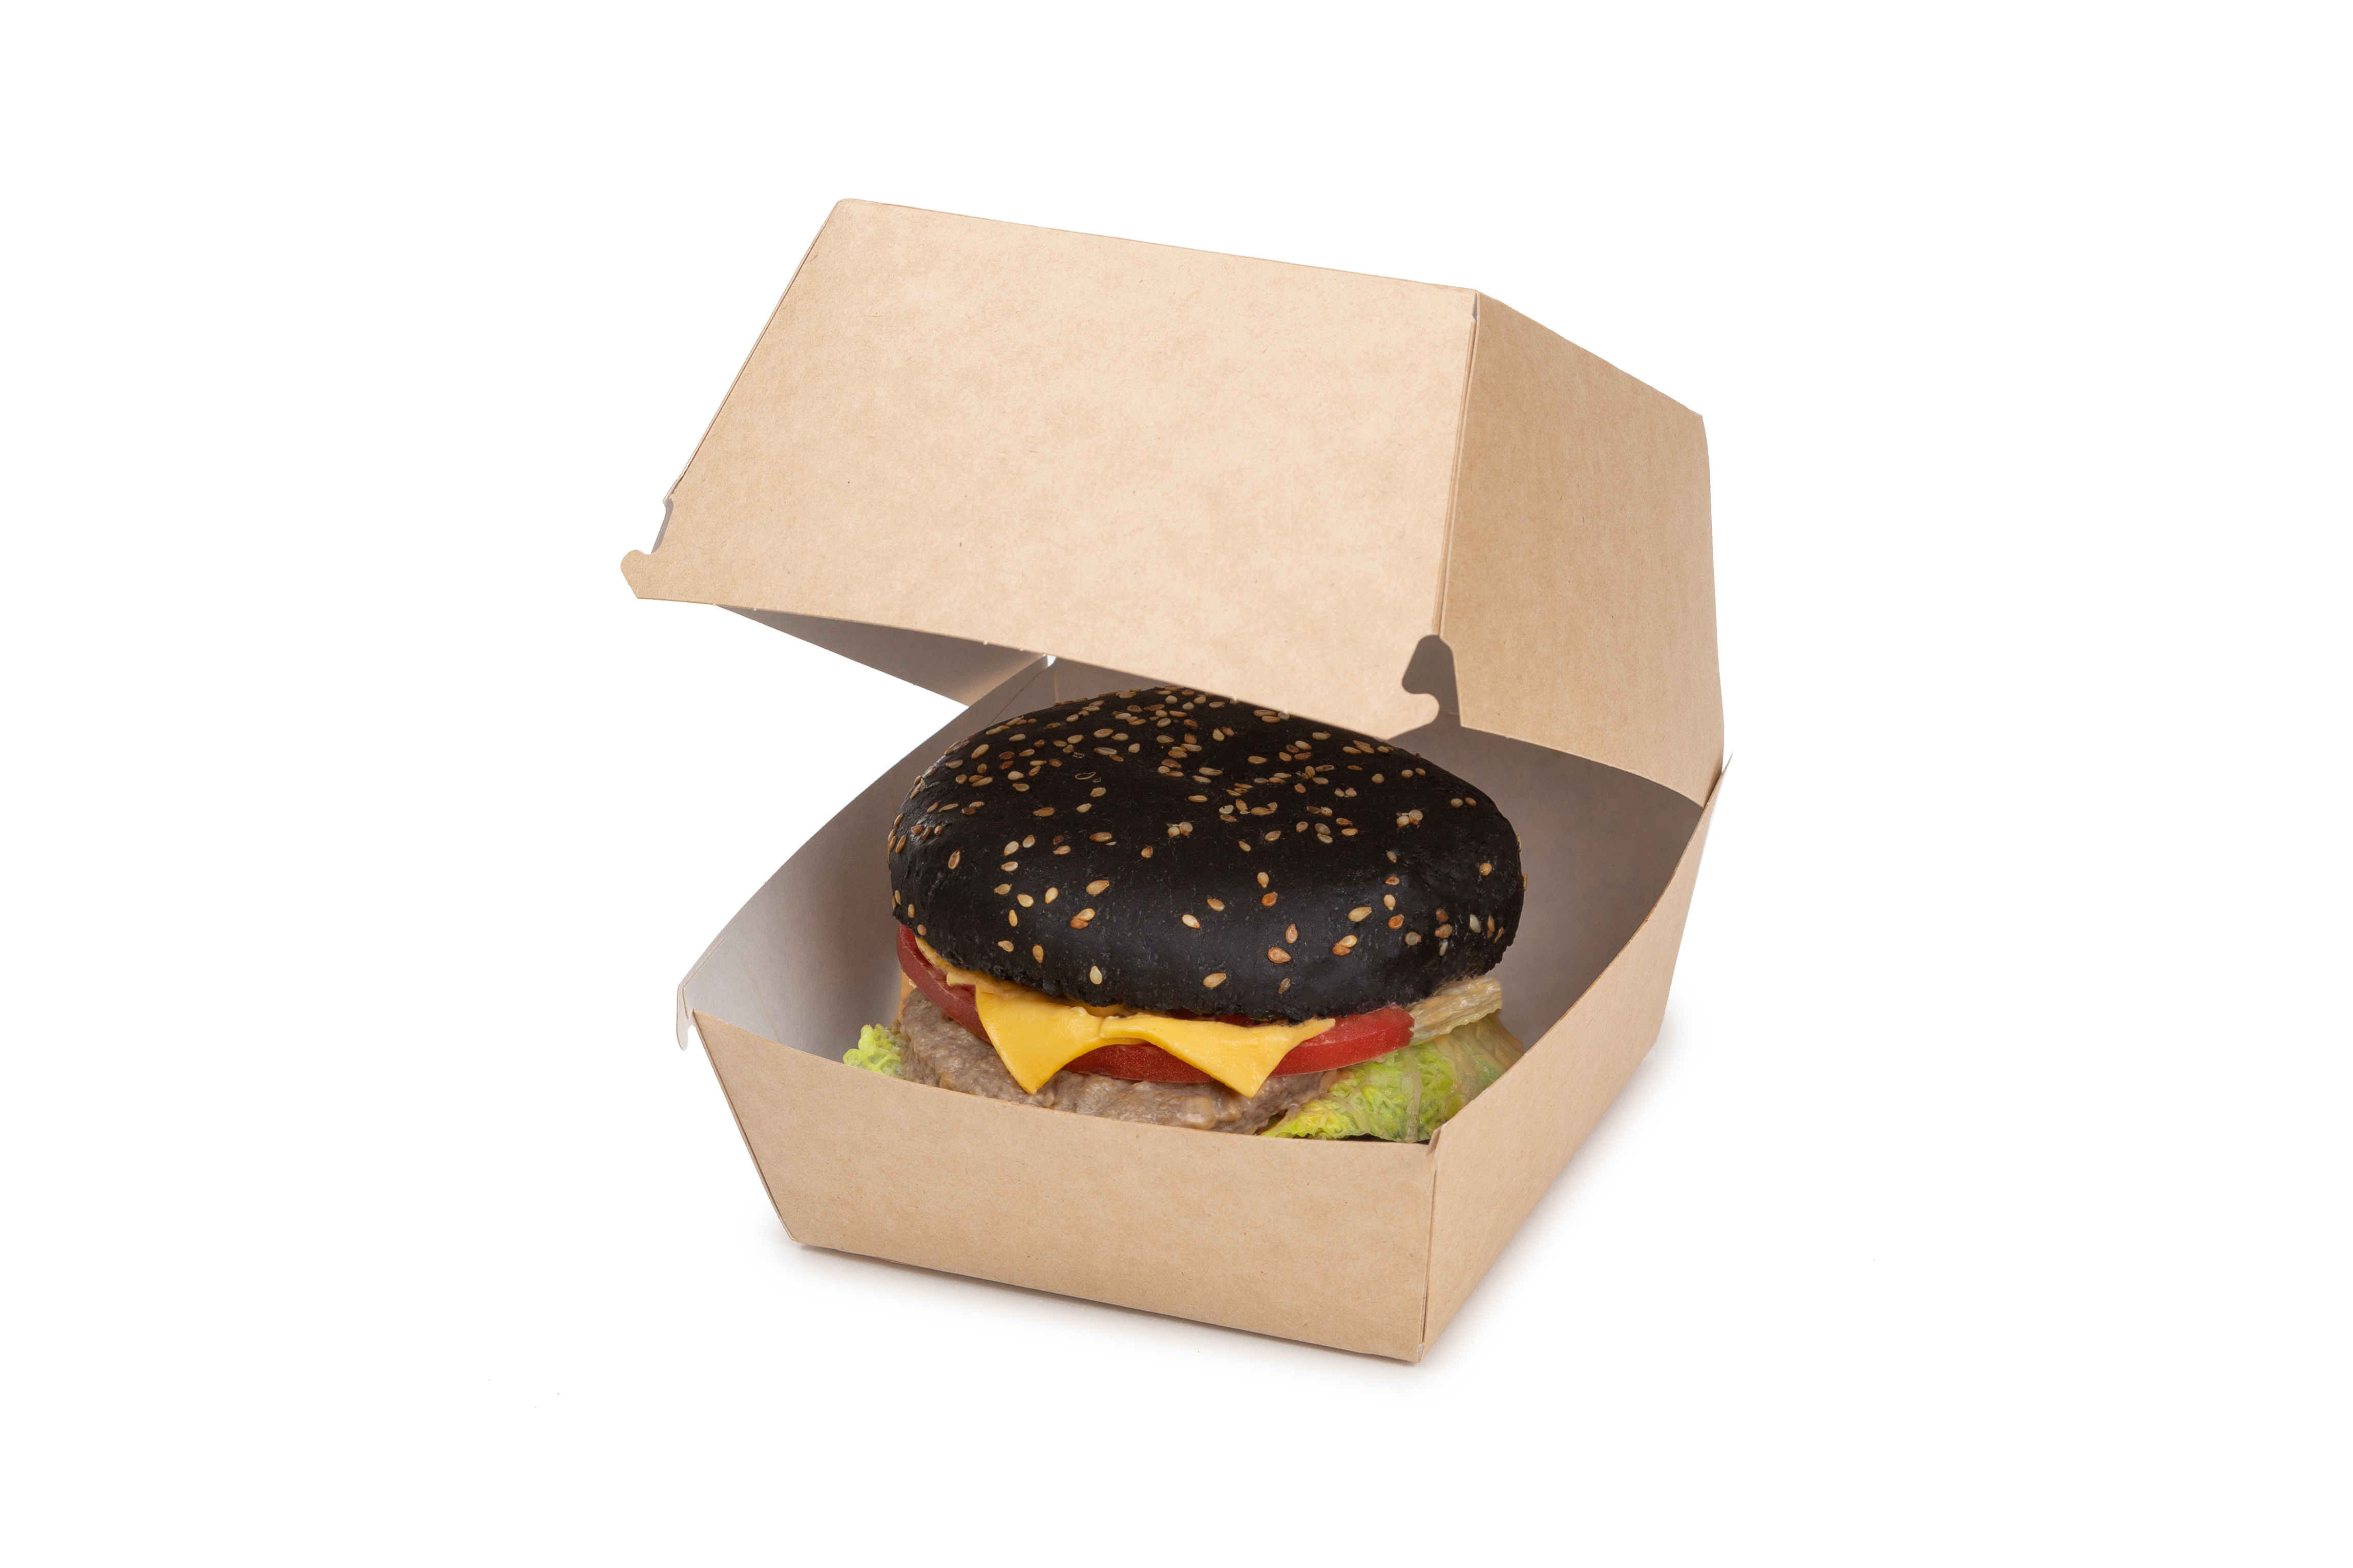 OSQ BURGER XL packaging for burgers